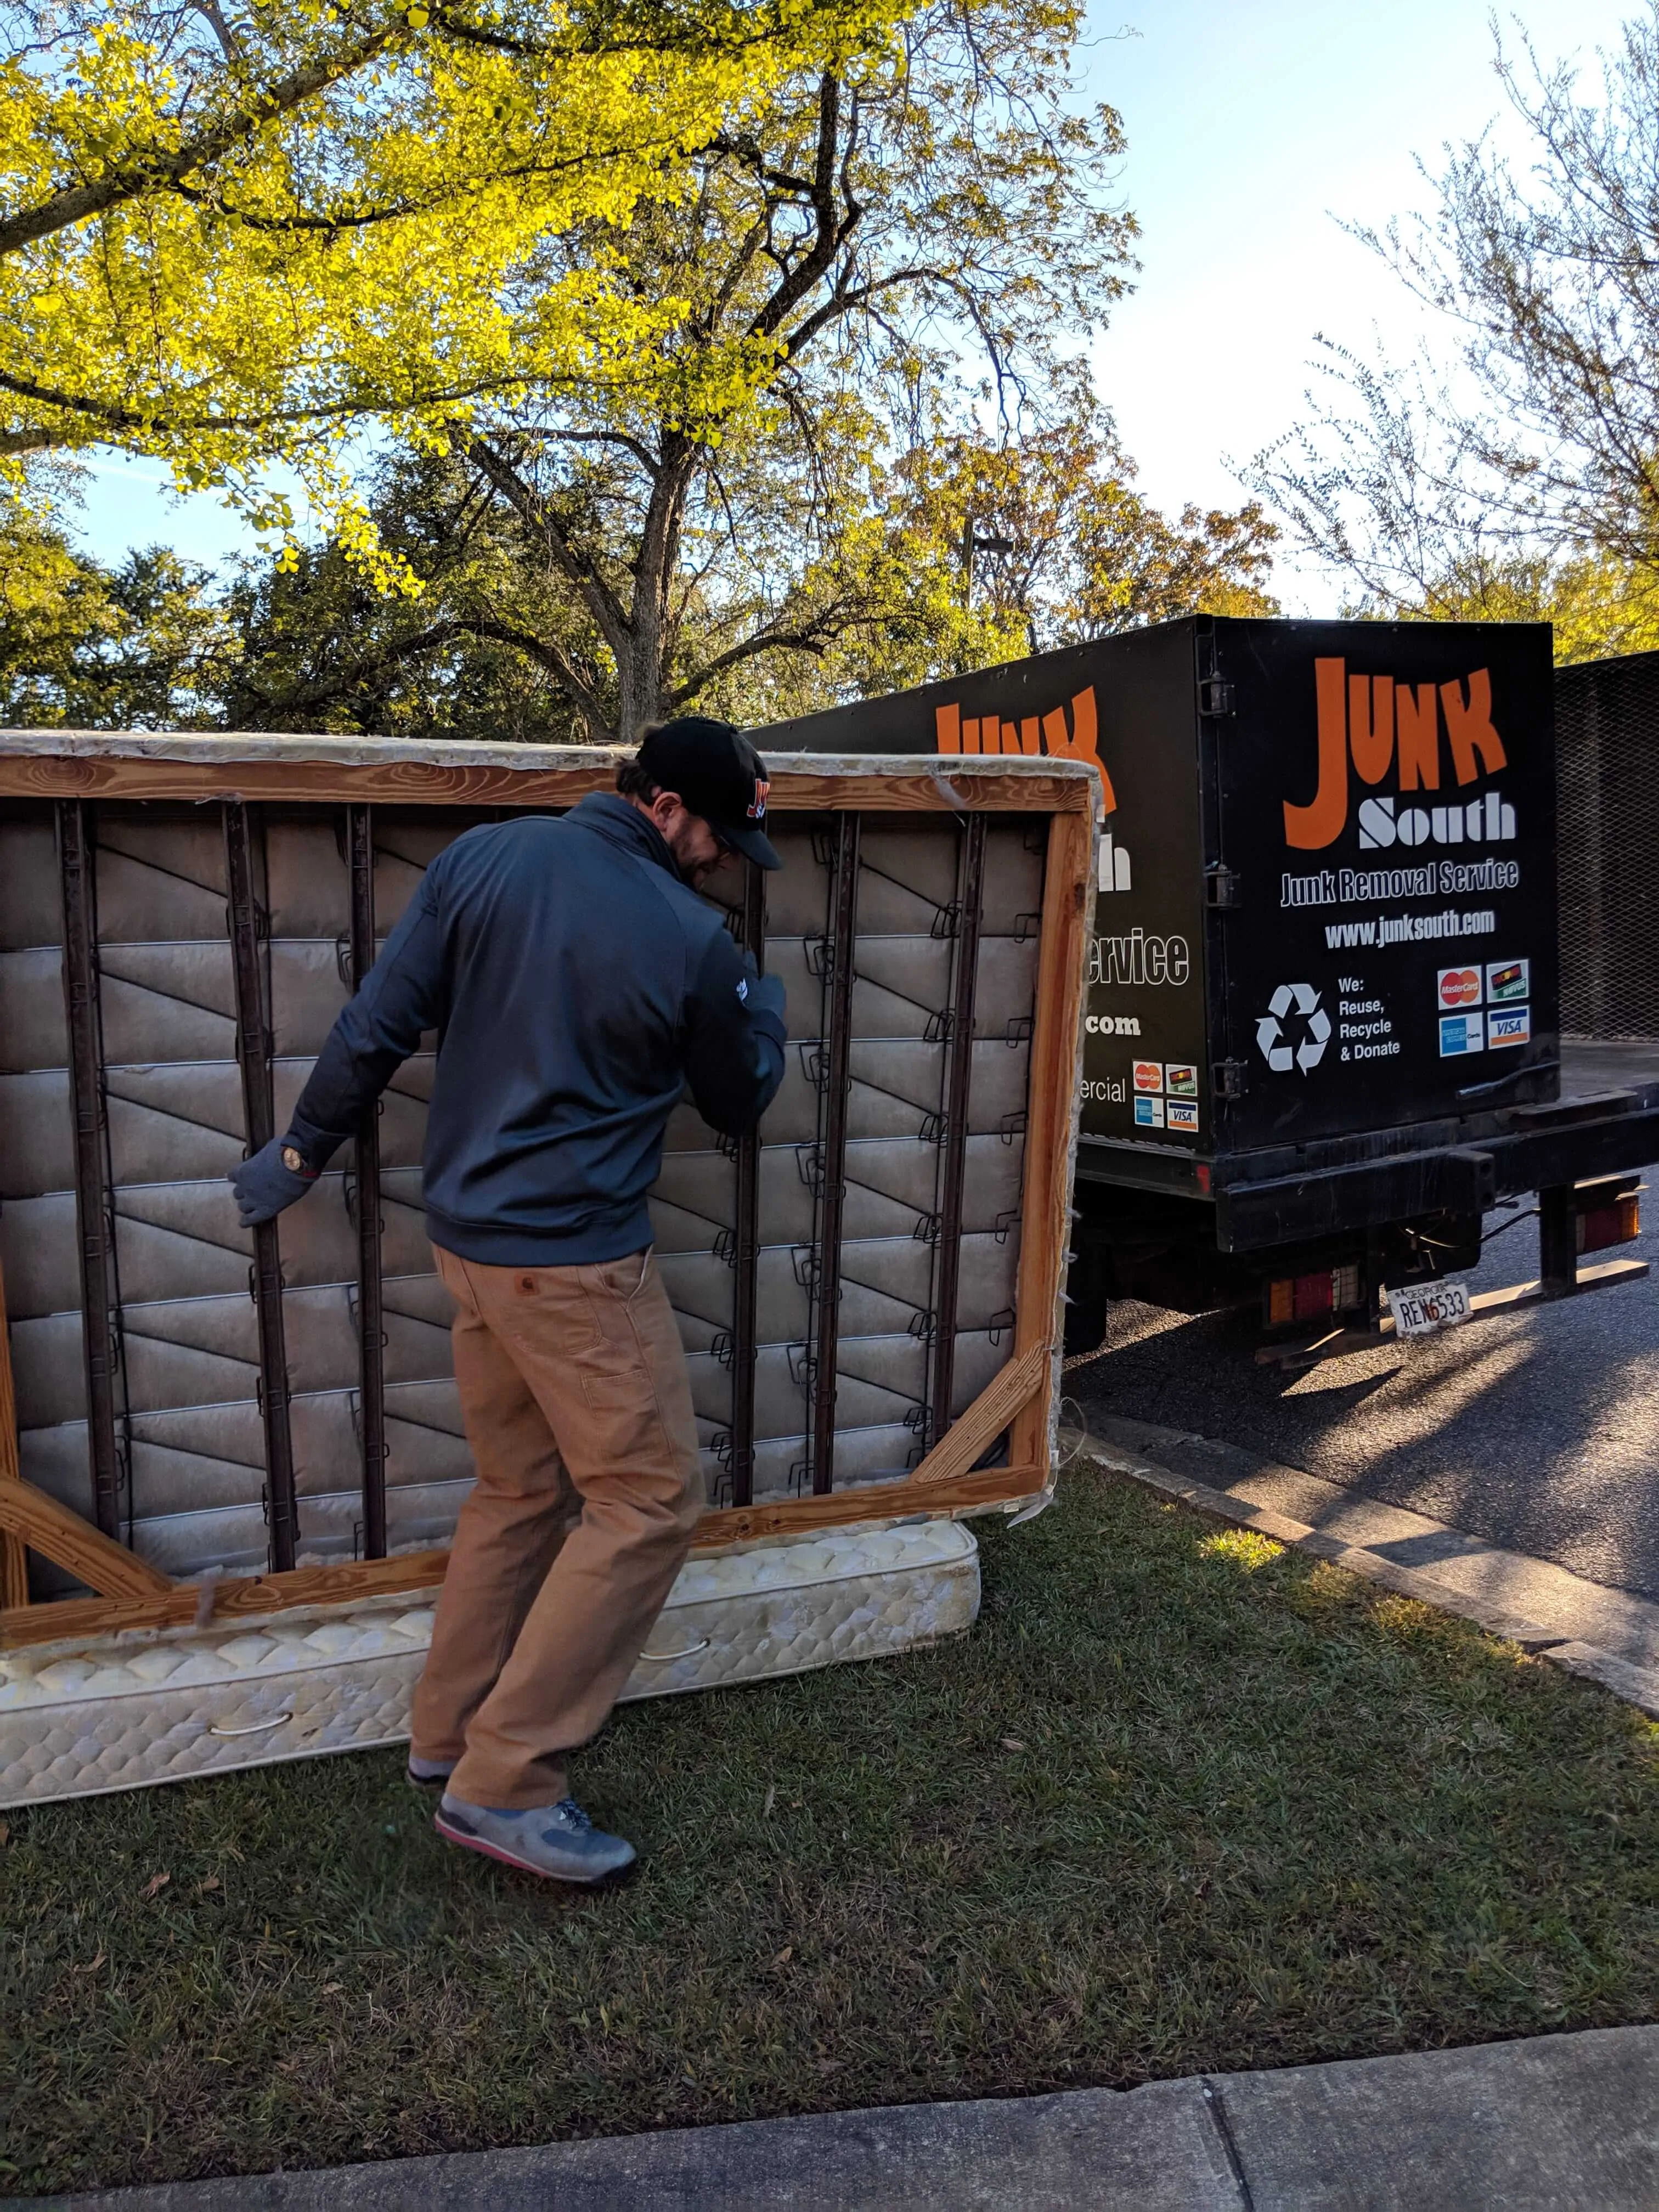 Junk South carries mattress and boxspring to truck